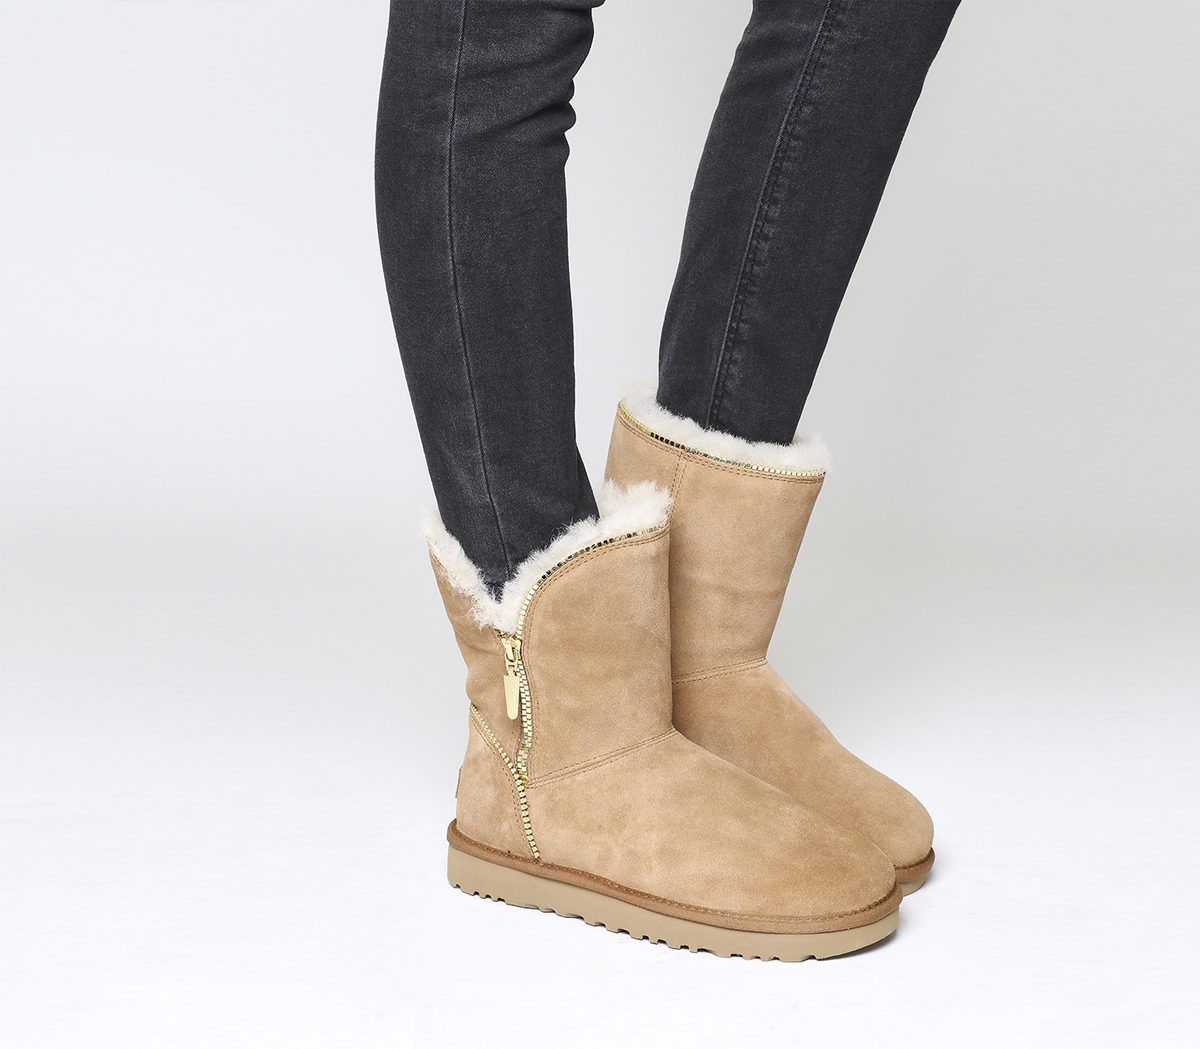 ugg women's florence boot